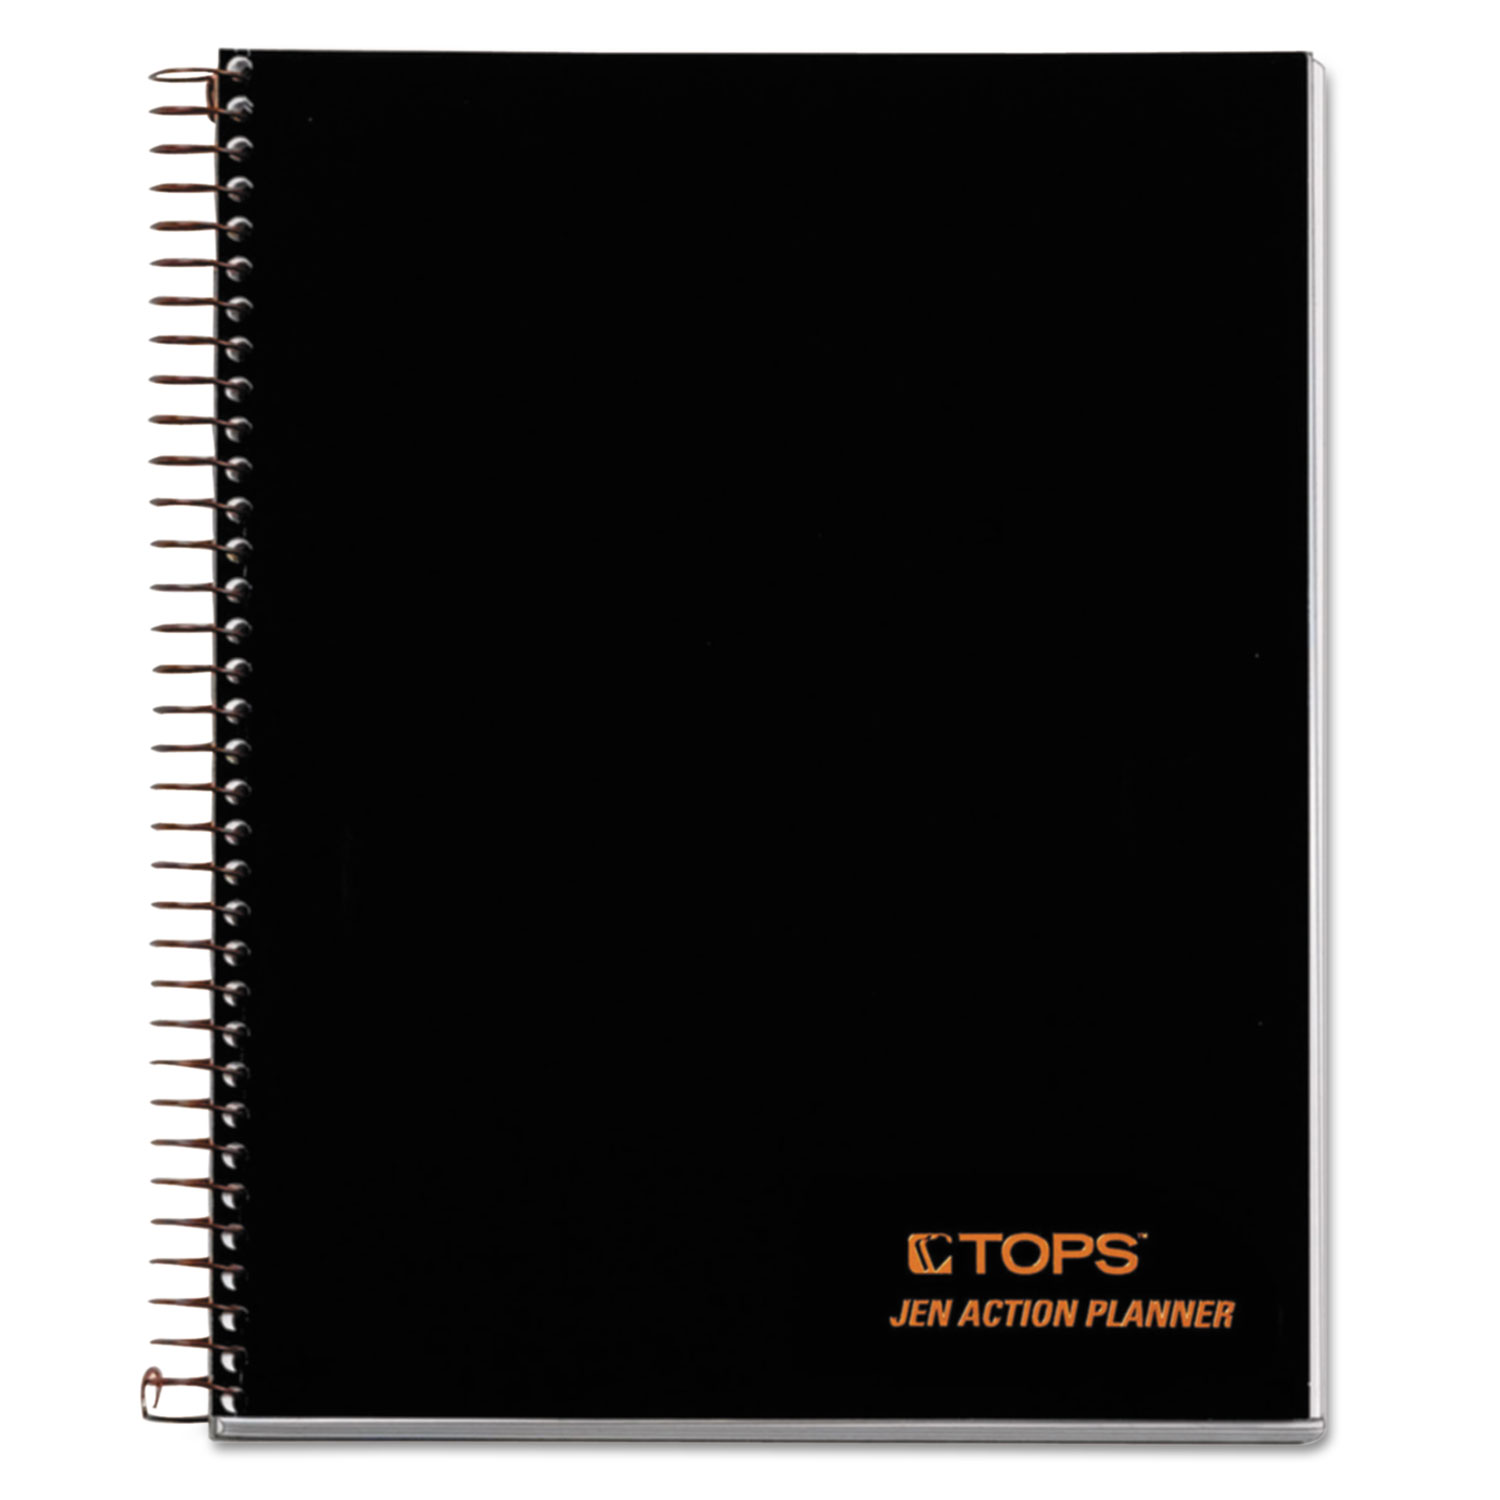  TOPS 63827 JEN Action Planner, Narrow Rule, Black Cover, 8.5 x 6.75, 84 Sheets (TOP63827) 